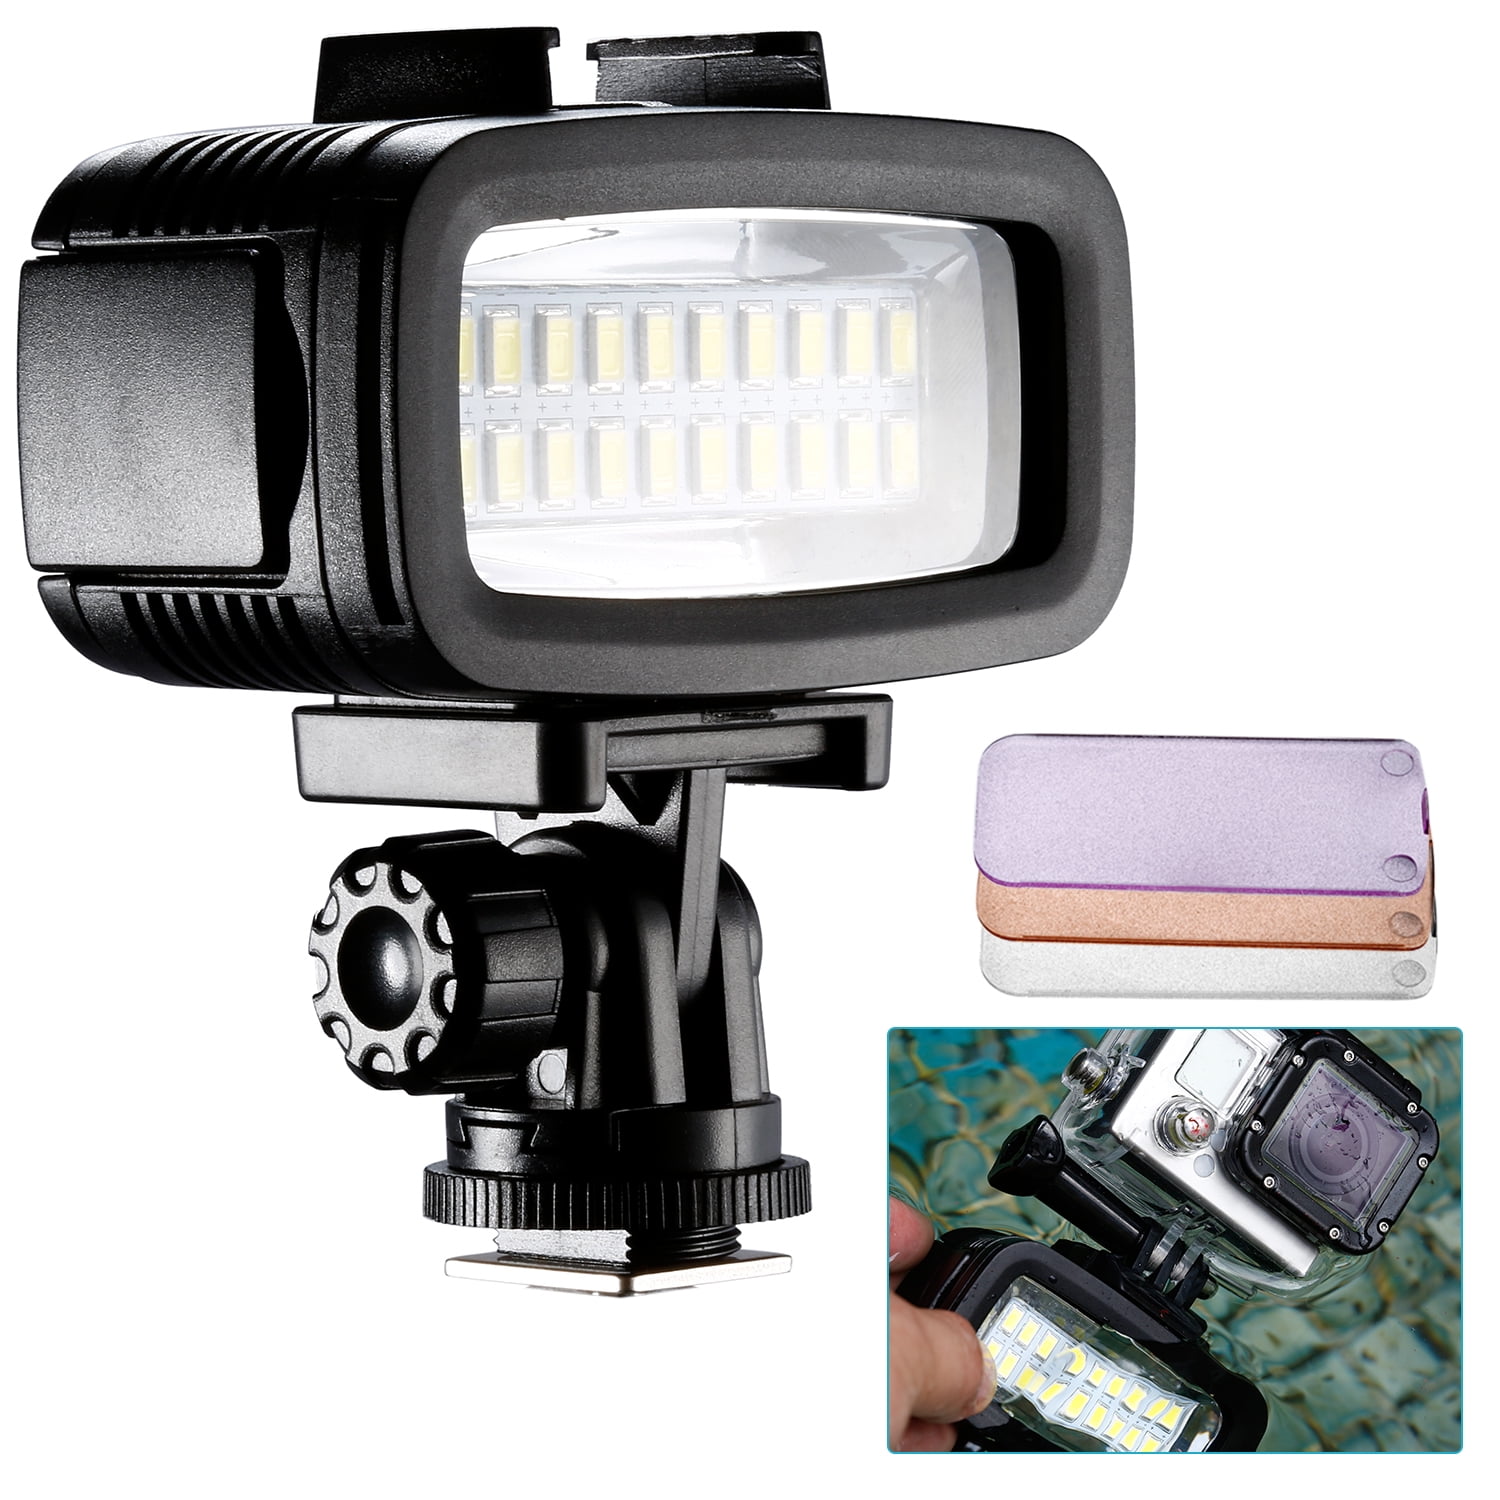 Neewer Waterproof Up to 131ft/40m Underwater 20 LED 700LM Flash Dimmable Light 